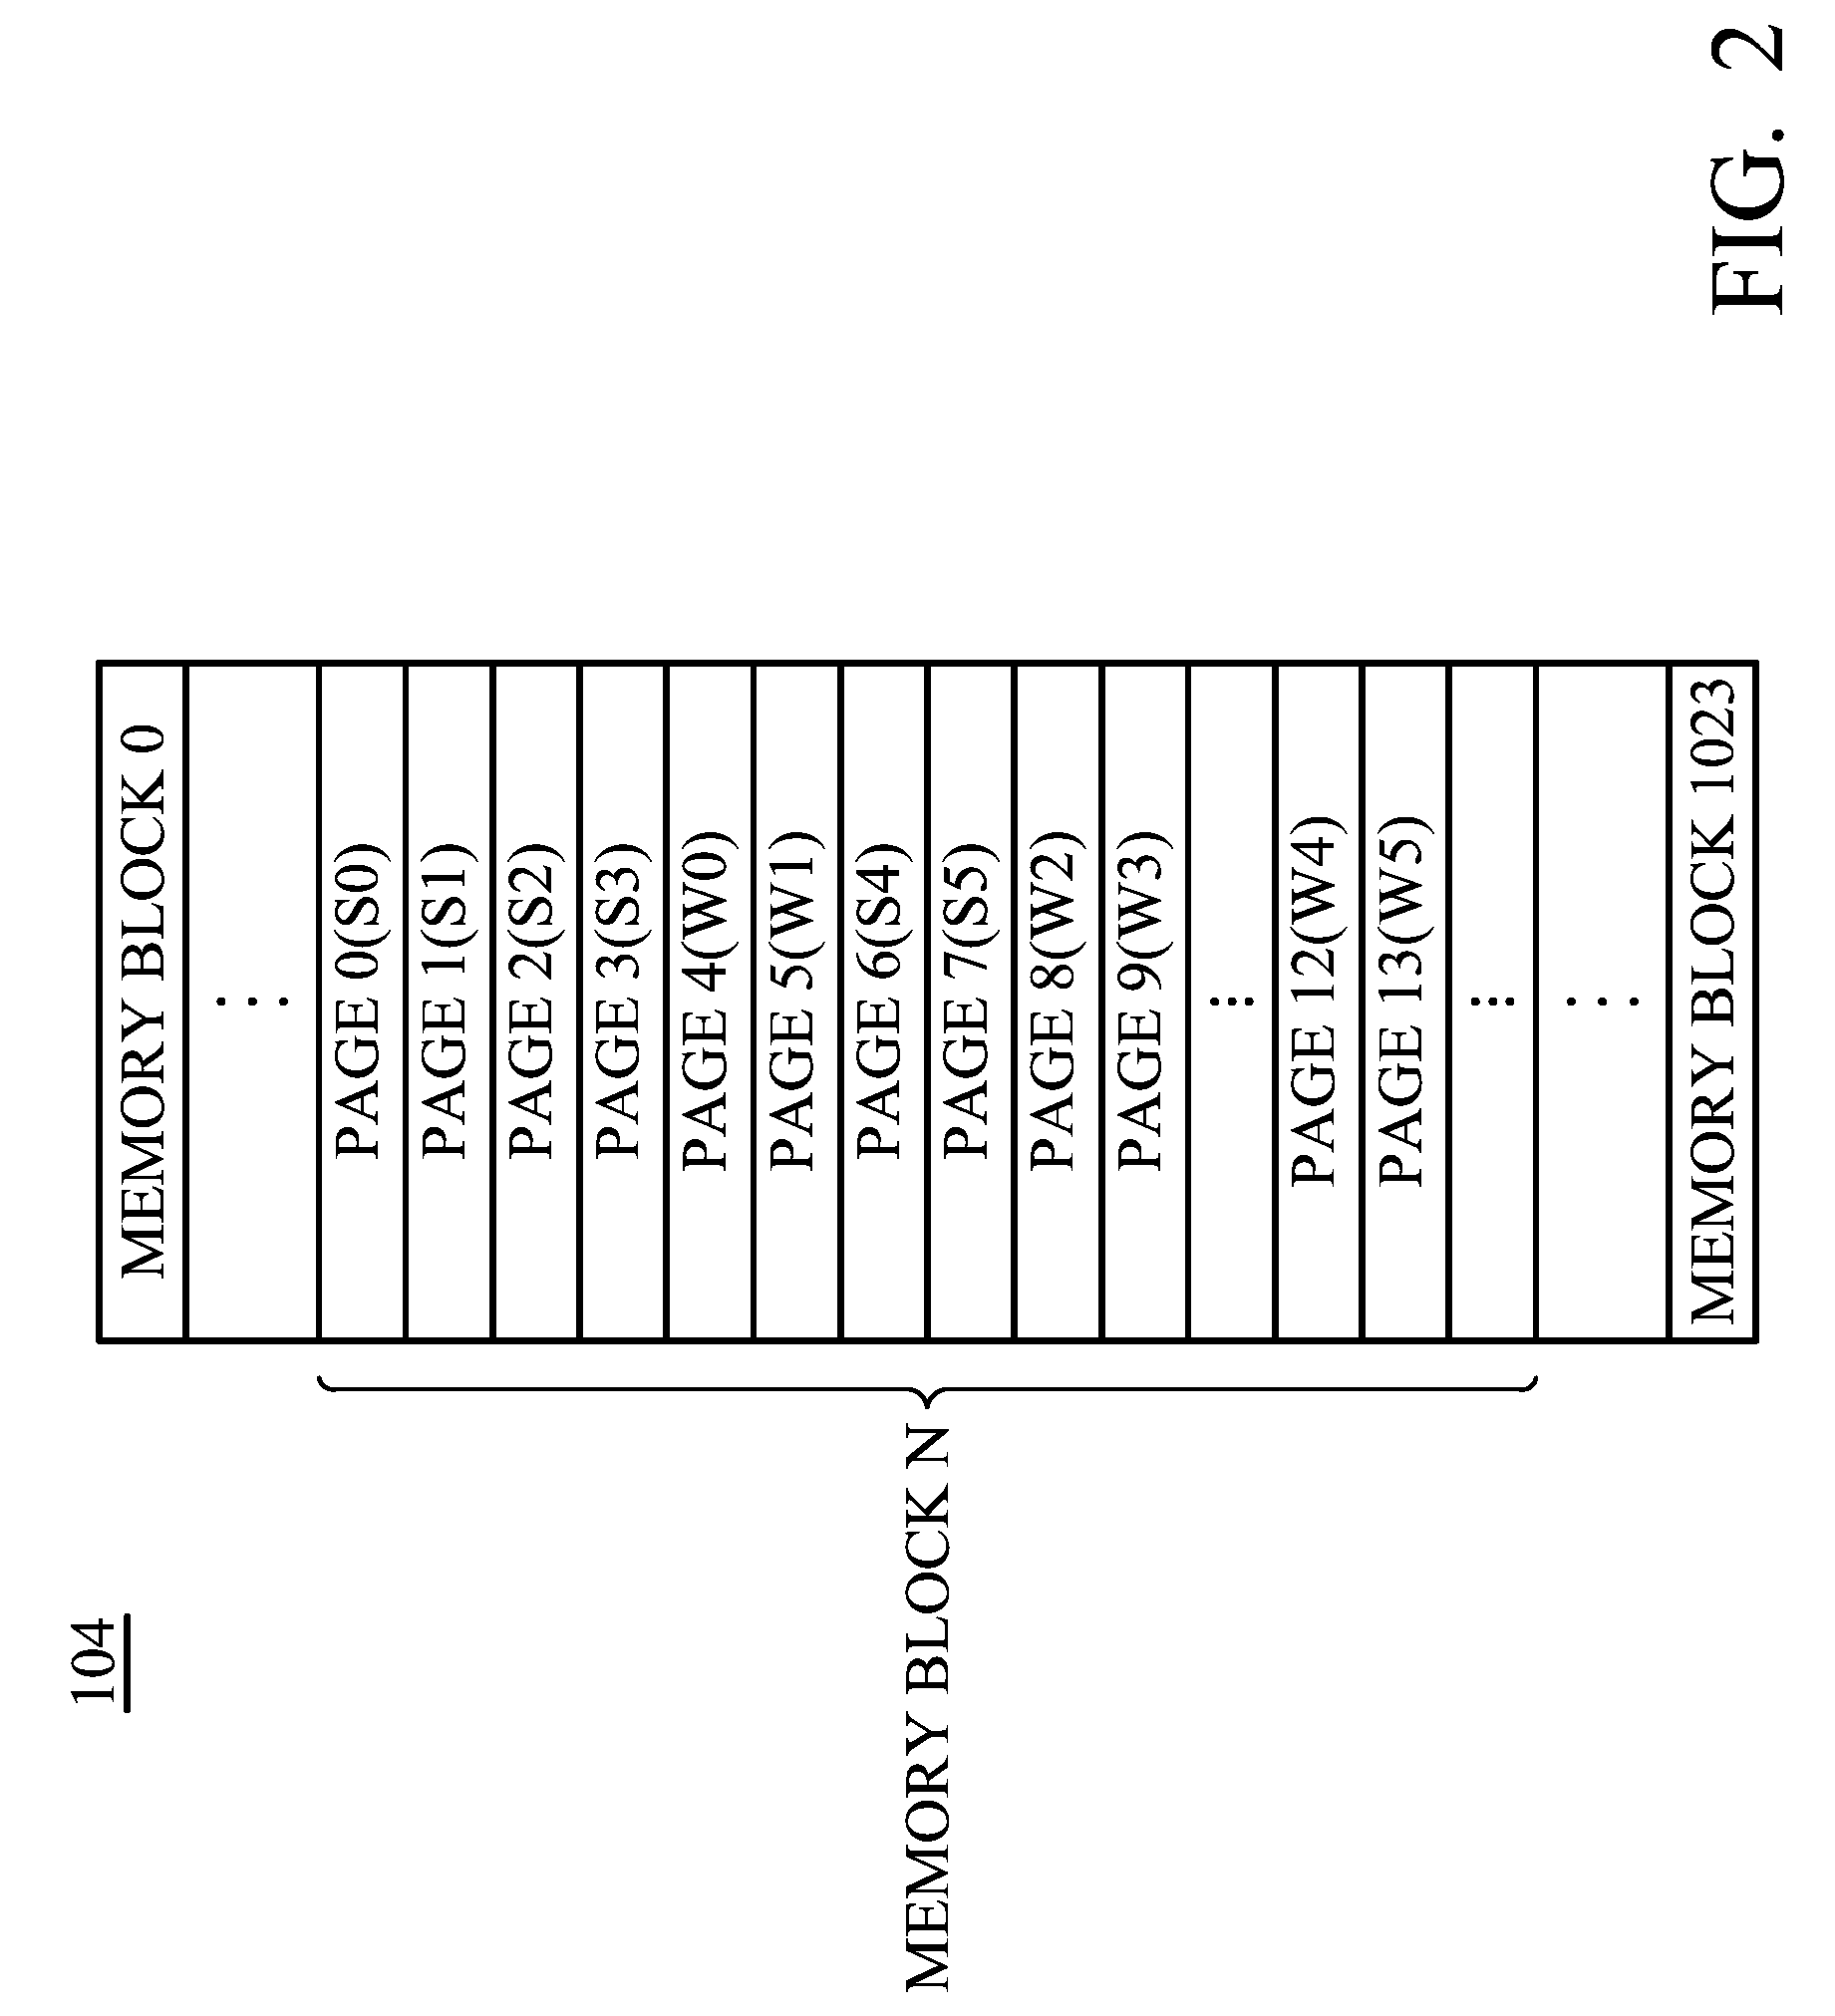 Method for preventing data loss during solder reflow process and memory device using the same